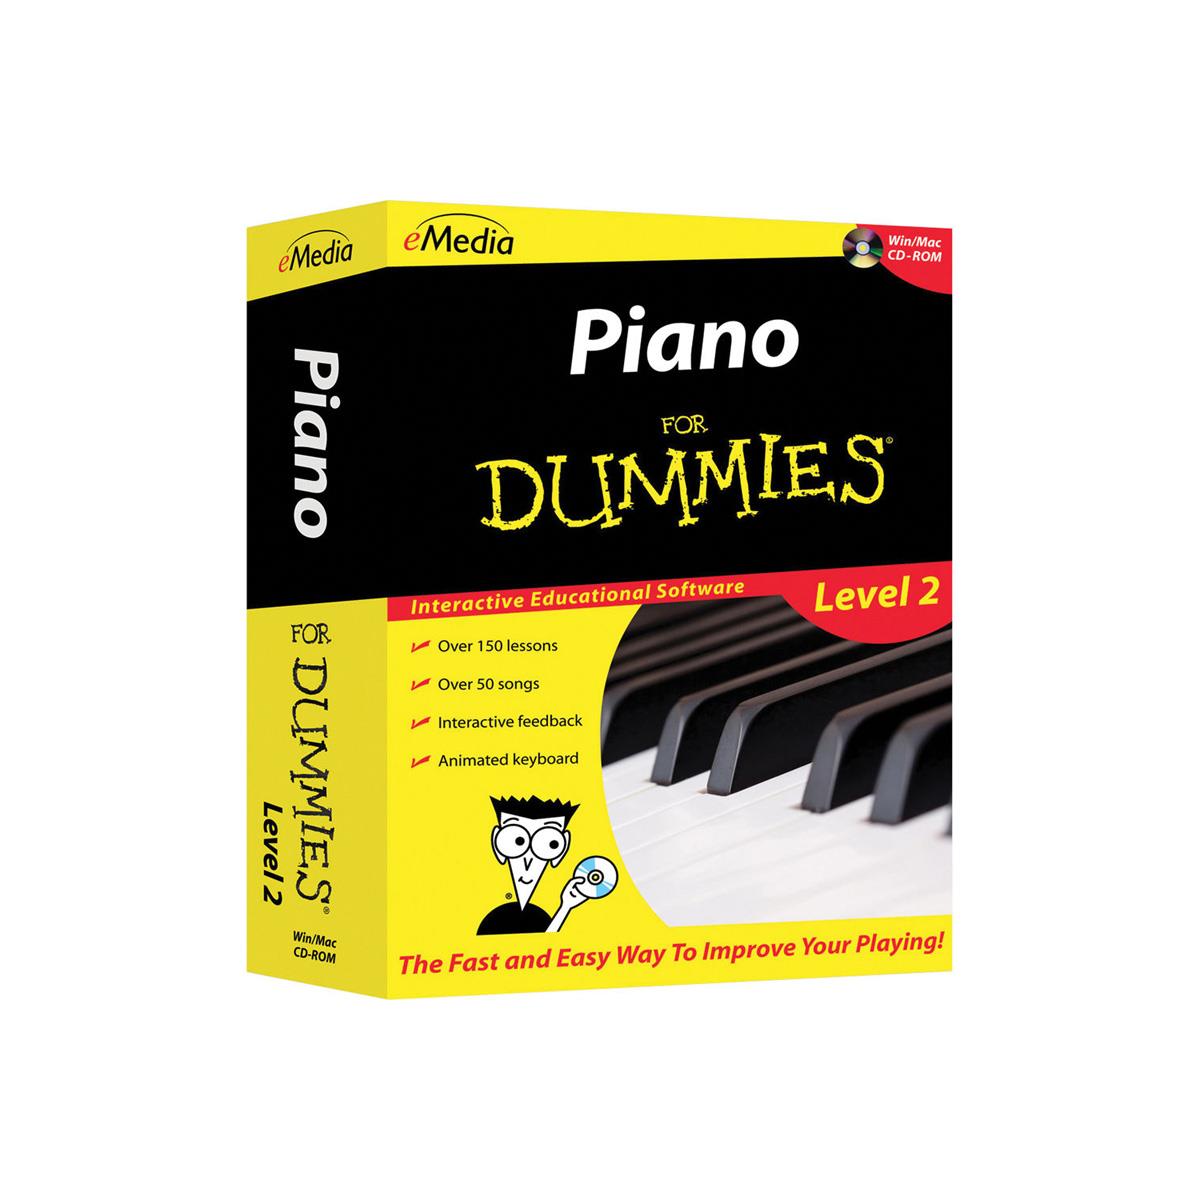 eMedia Piano For Dummies Level 2 Software for Mac, Electronic Download -  FD09108DLM